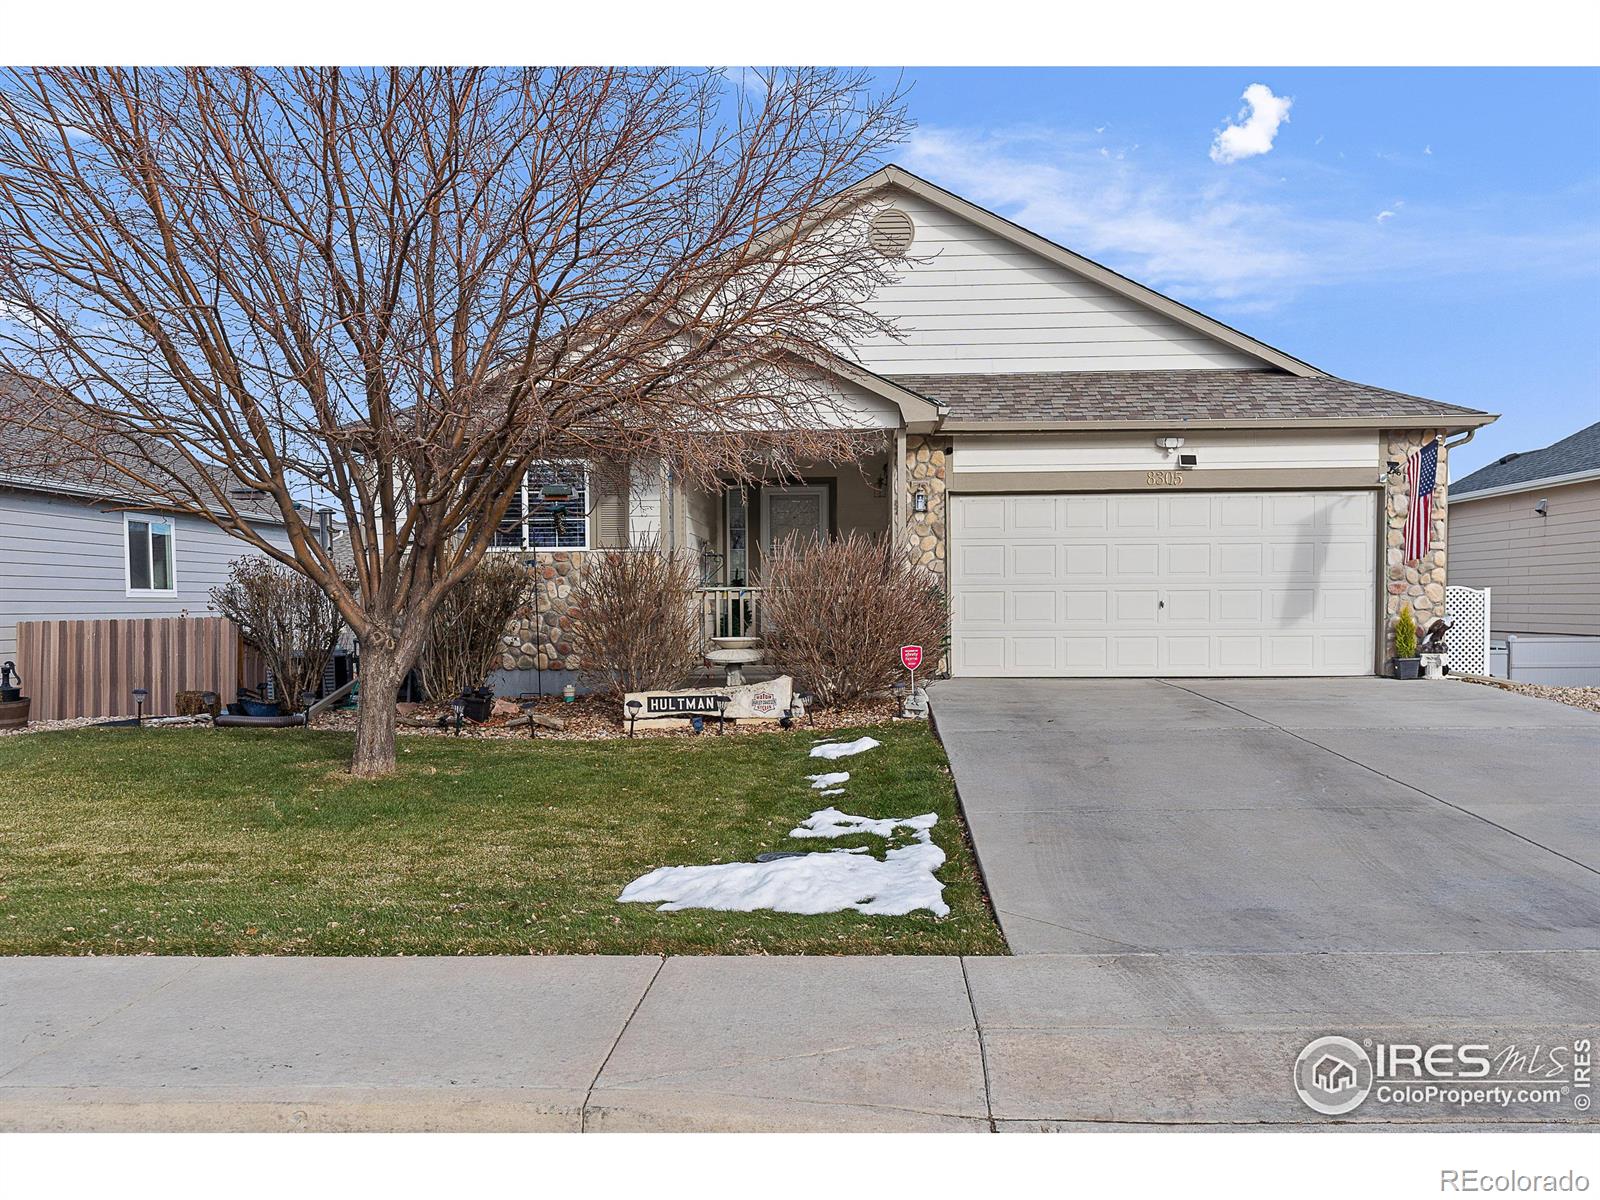 8305  18th st rd, Greeley sold home. Closed on 2024-02-02 for $430,000.